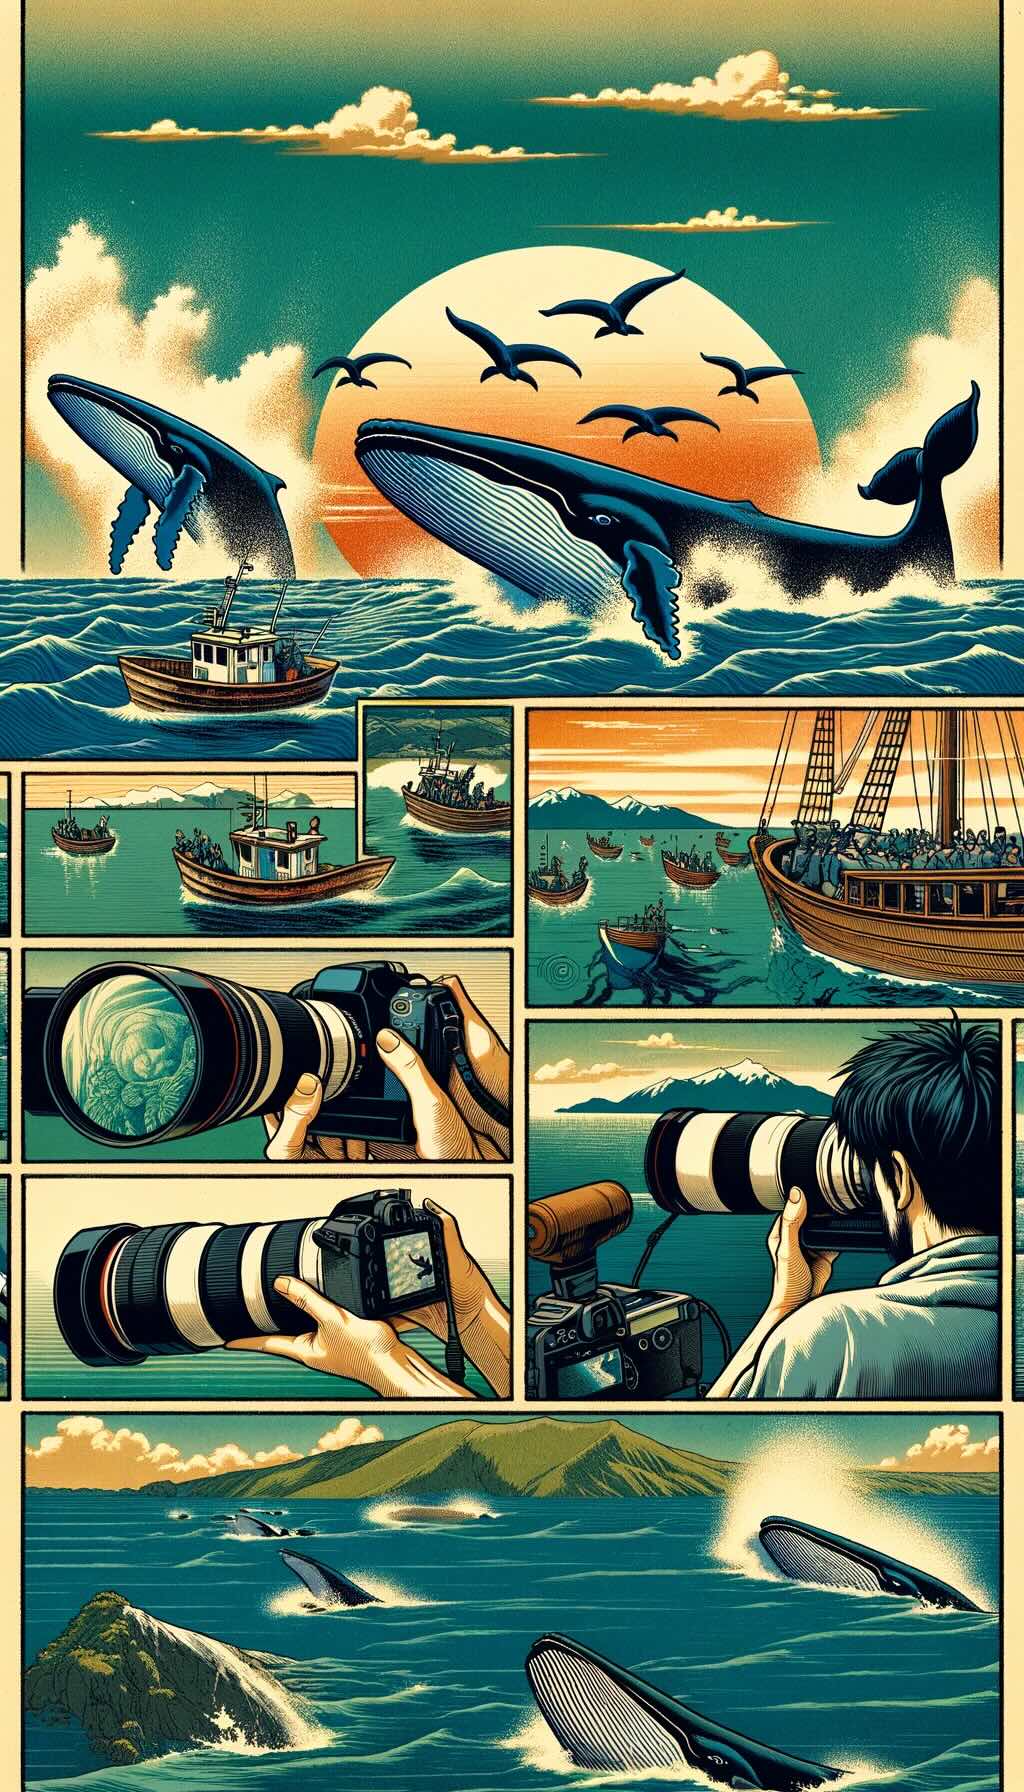 Art of photography during whale watching beautifully combines scenes of photographers capturing the majesty of whales, with a focus on the recommended equipment and the importance of enjoying the experience.